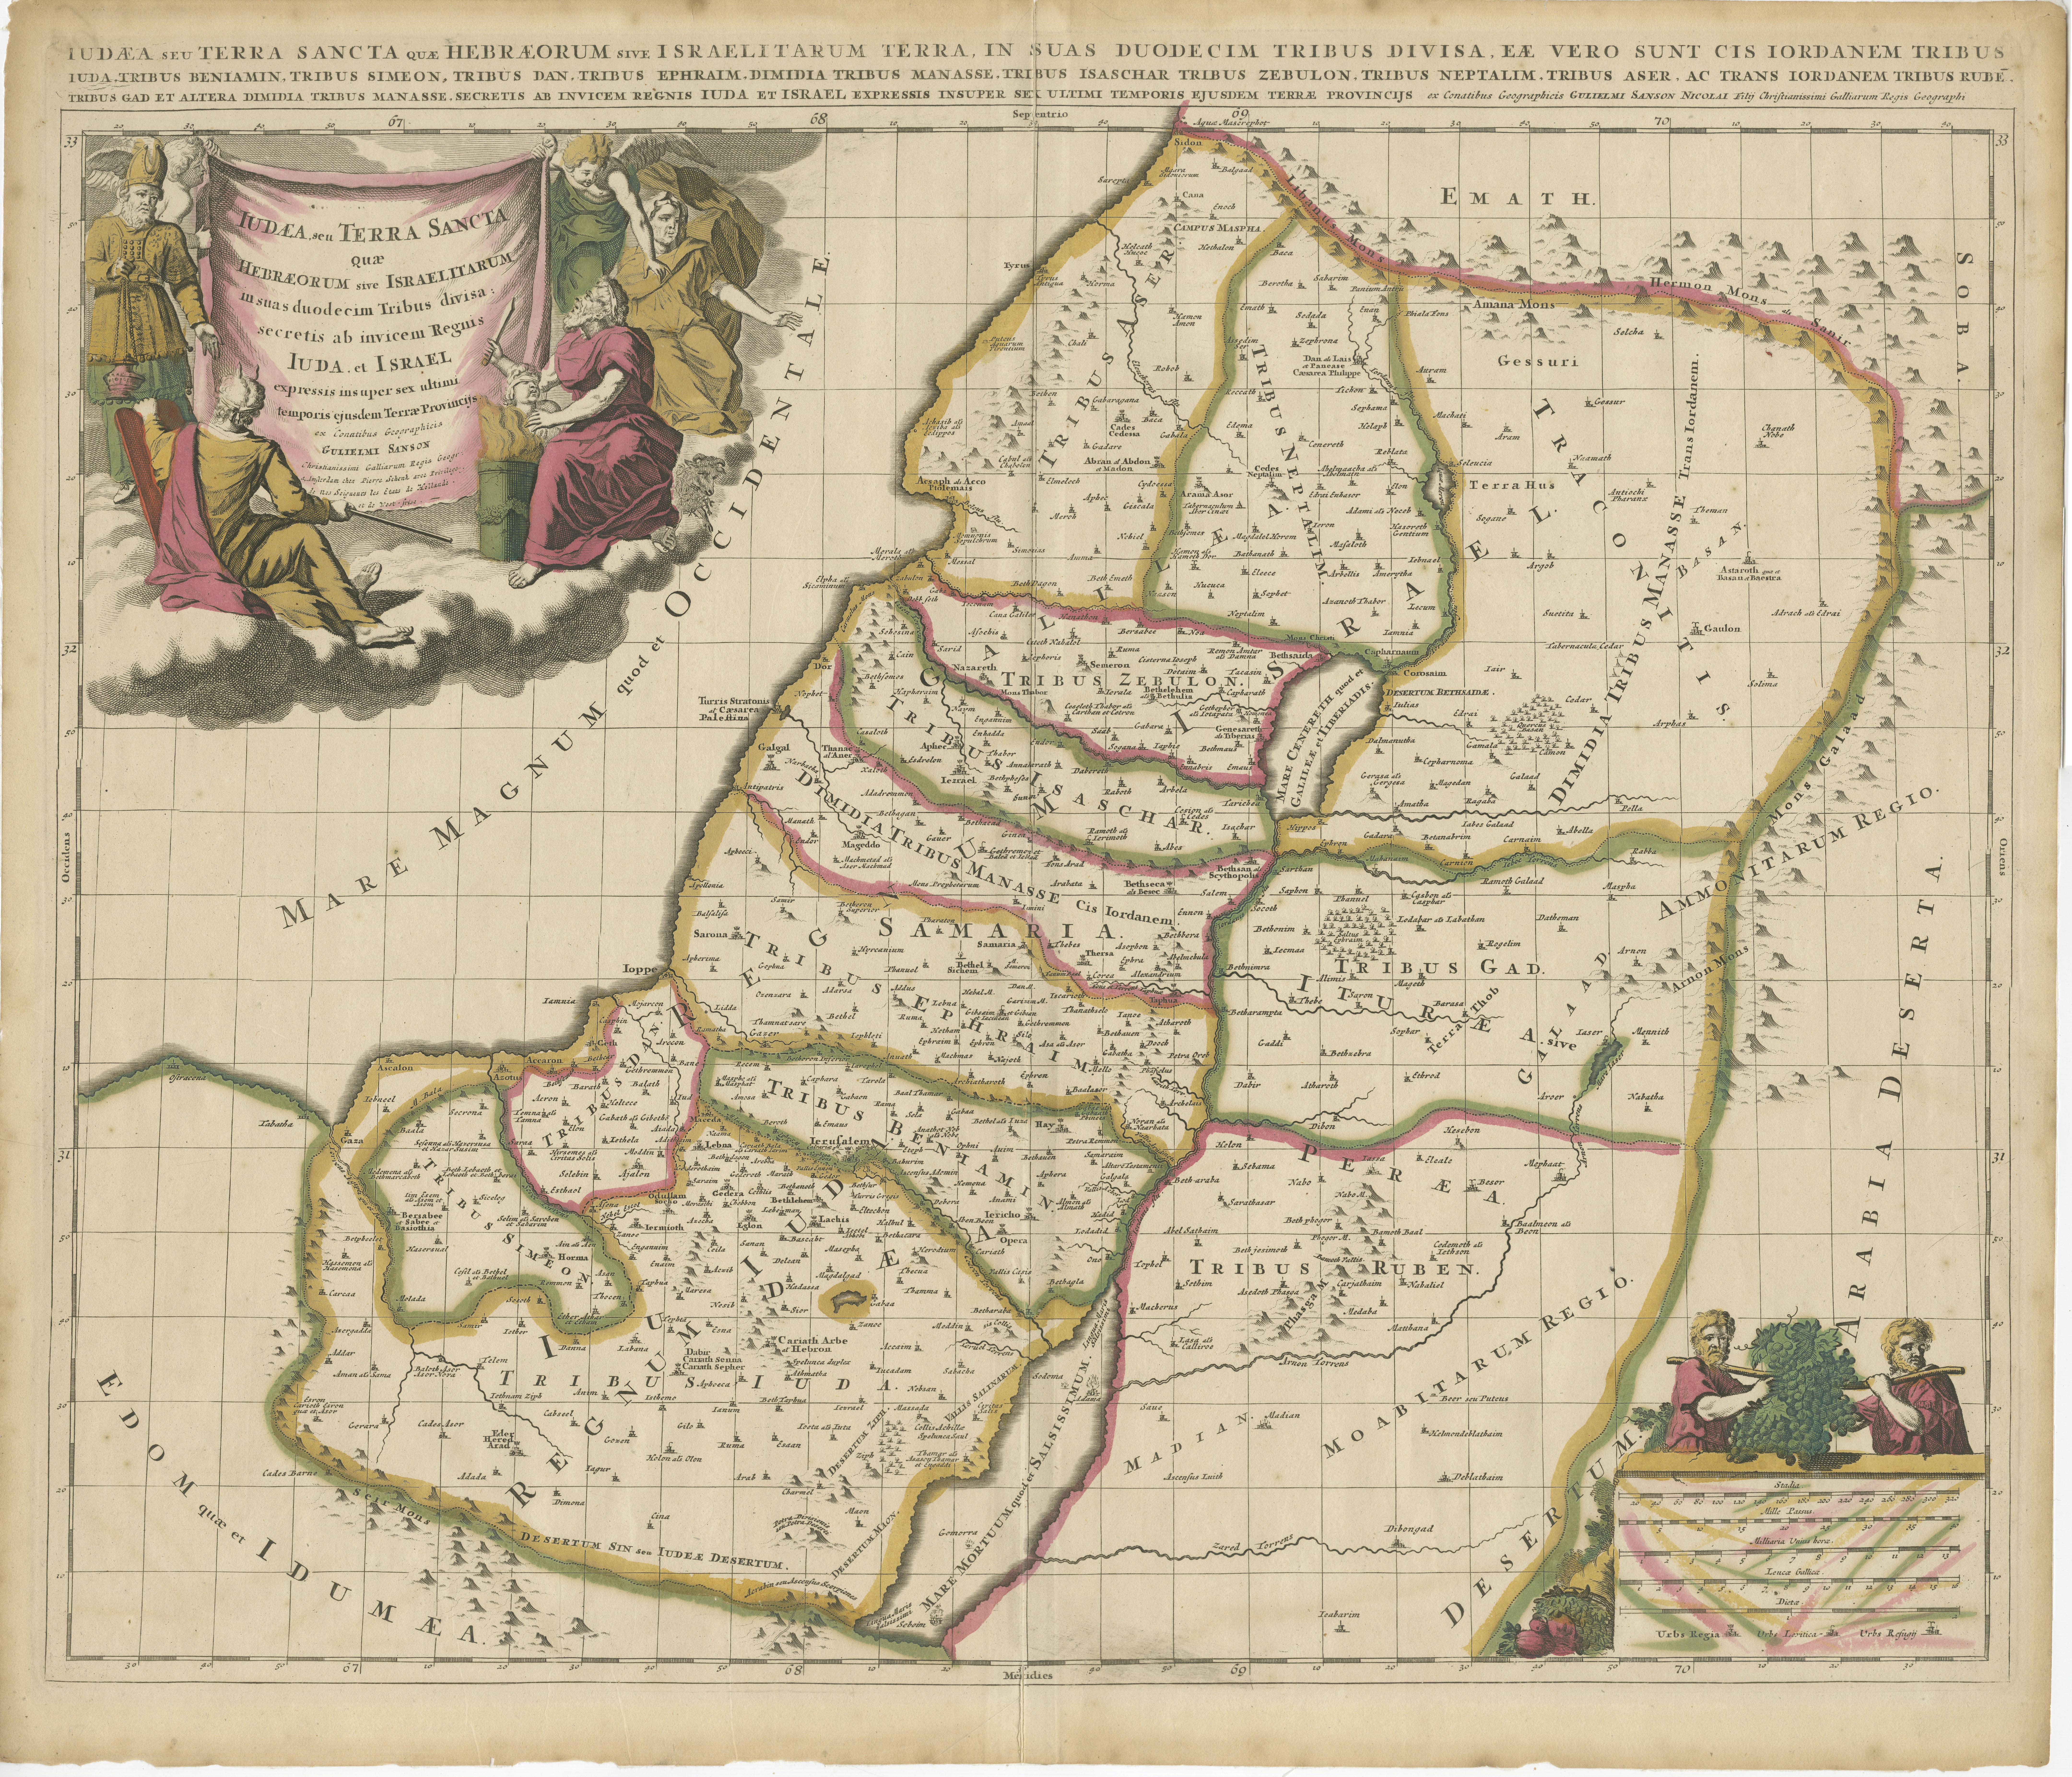 Antique map titled 'Judaea seu Terra Sancta quae Hebraeorum sive Israelitarum (..)'. Map of The Holy Land, showing the location of the various tribes, in two kingdoms, Judah and Israel as well as in six provinces. Shows Palestine on both sides of